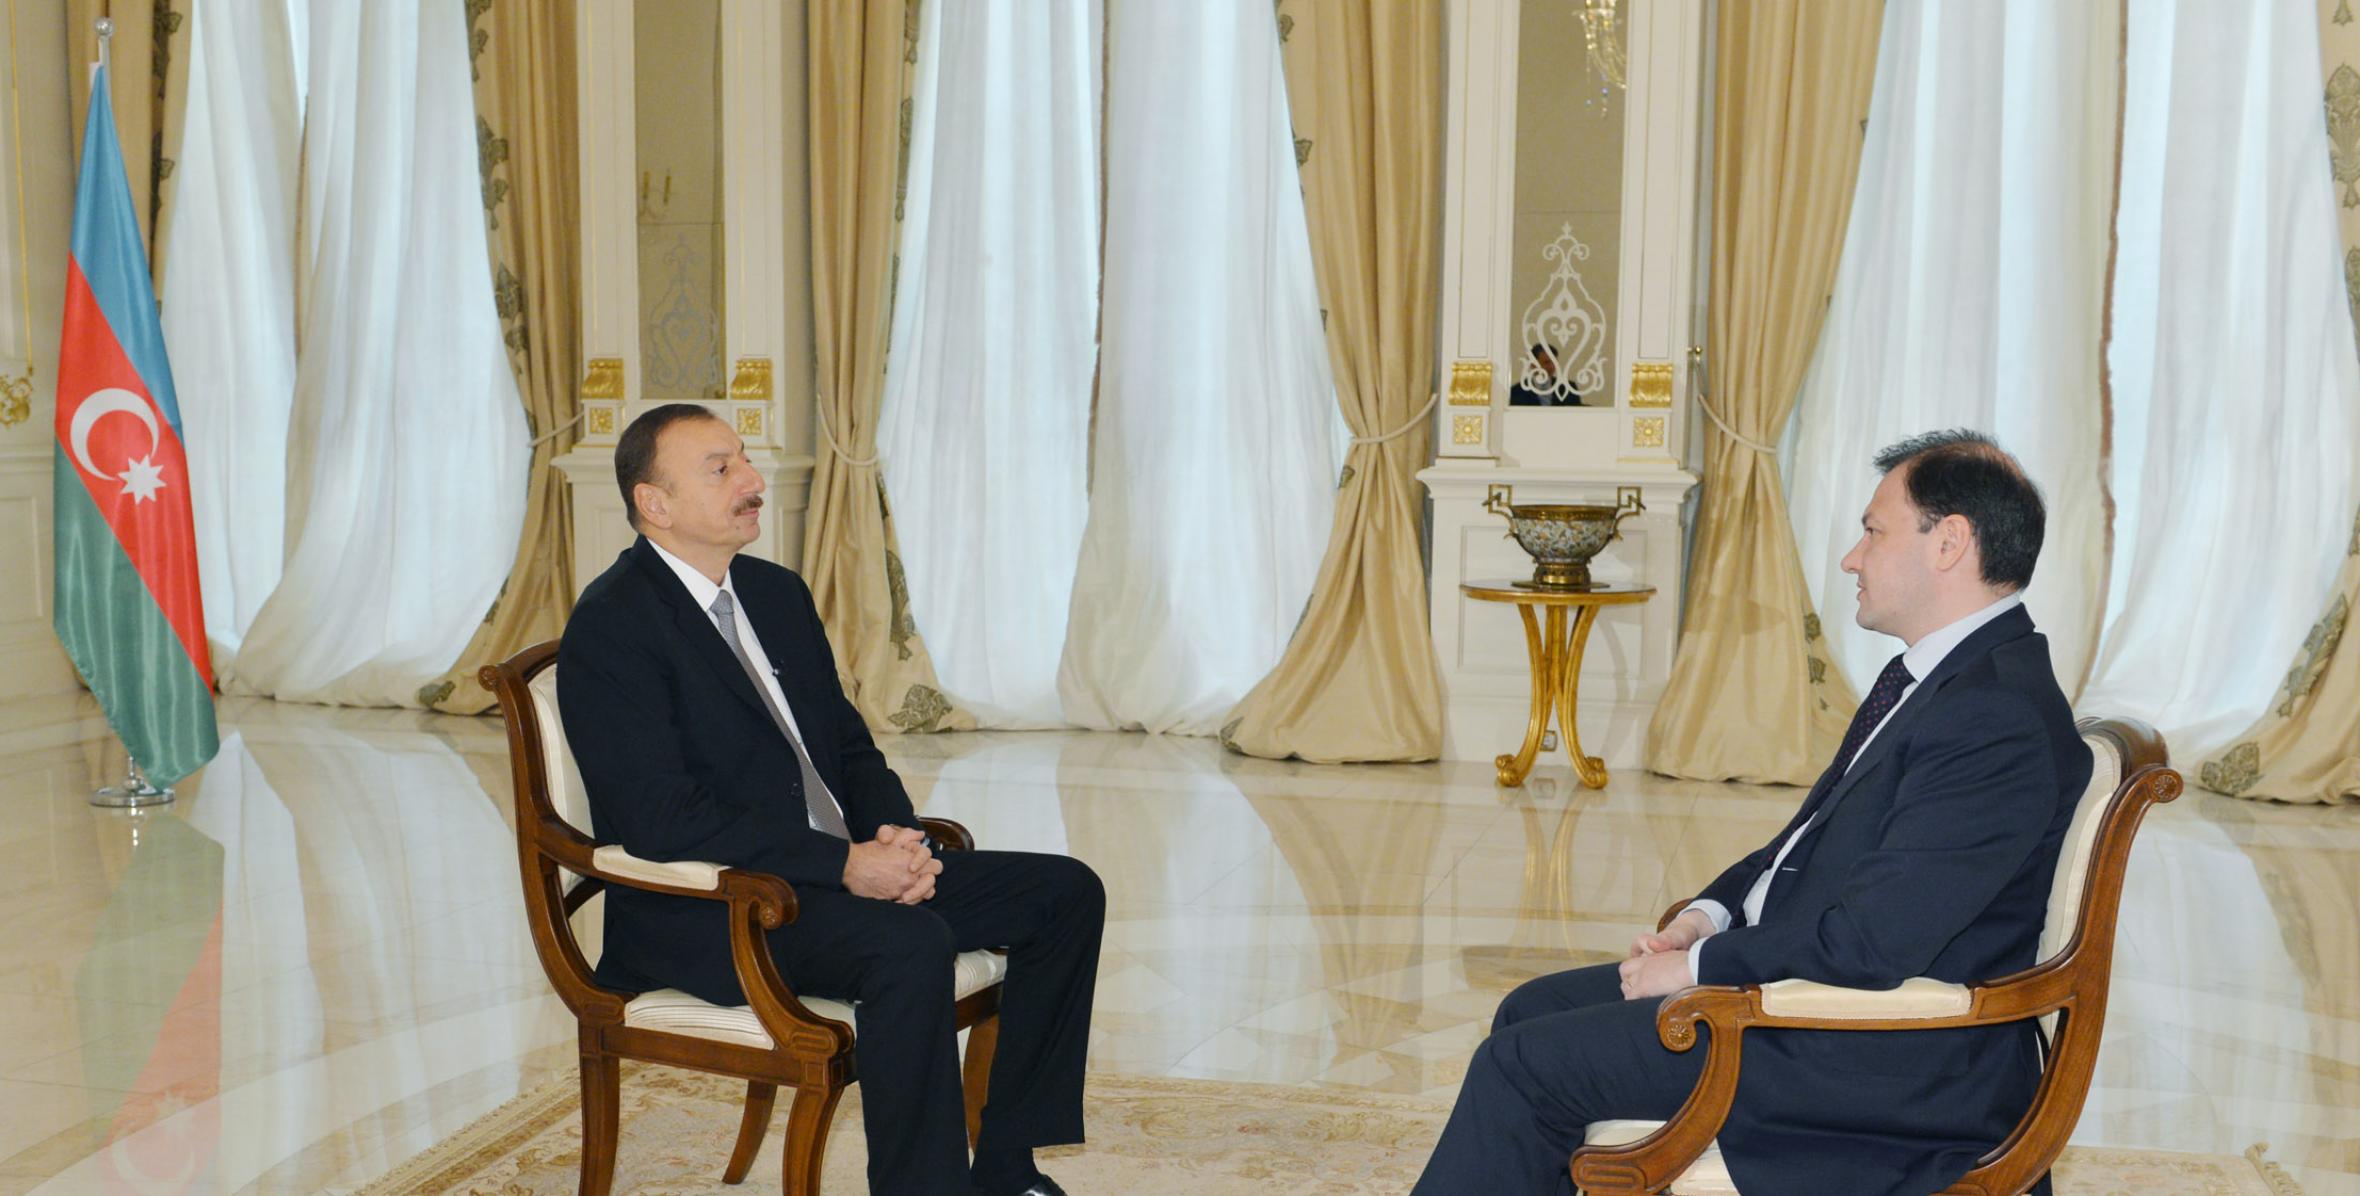 Ilham Aliyev was interviewed by “Russia-24” television channel